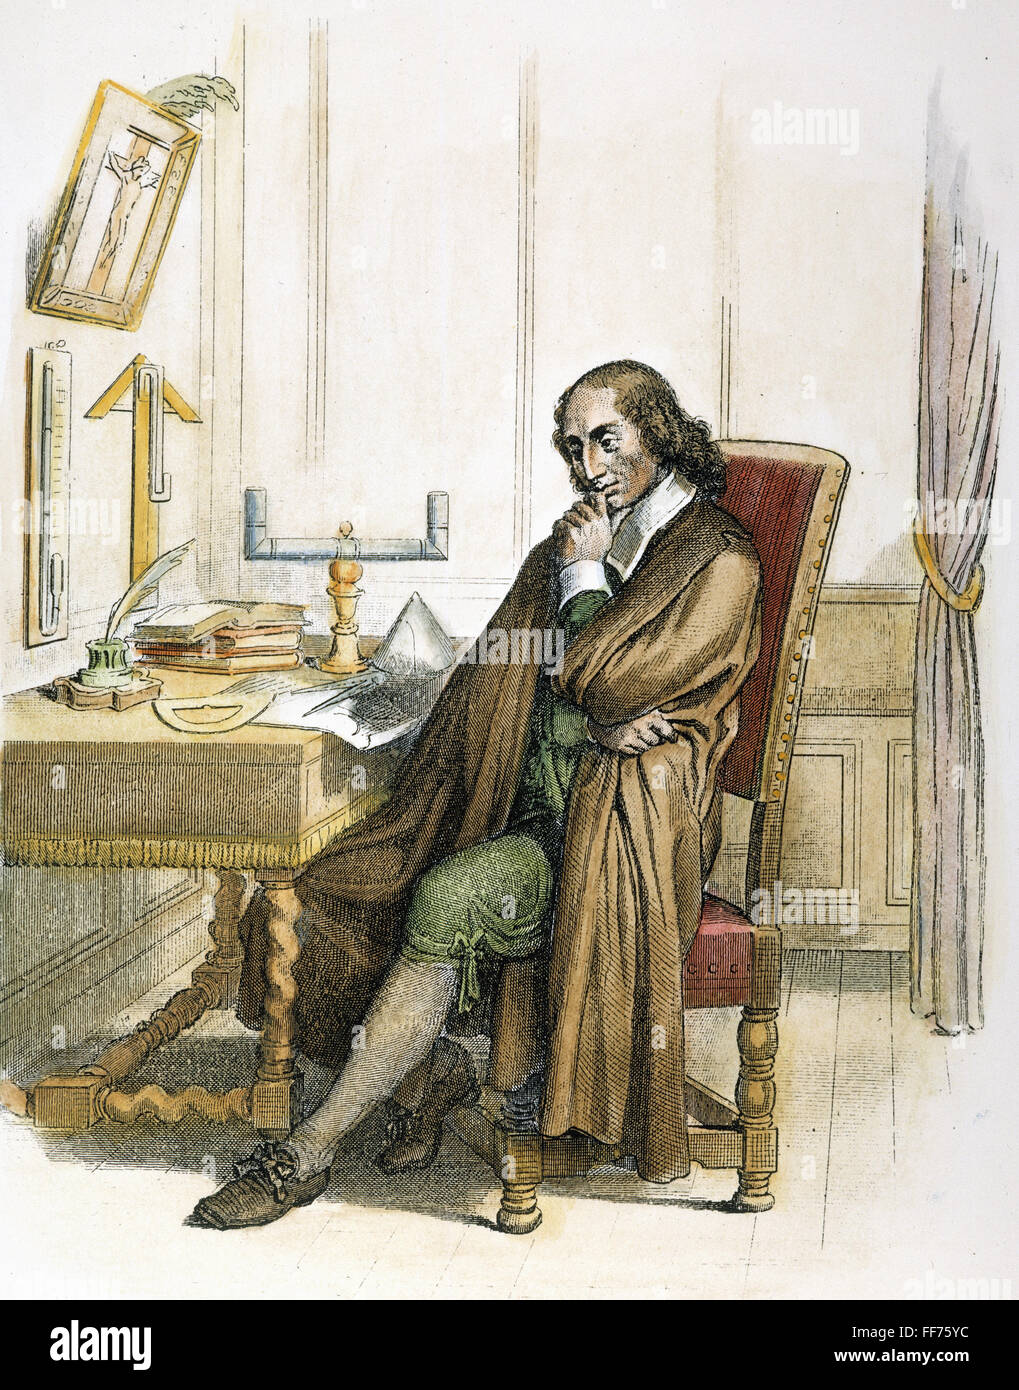 BLAISE PASCAL (1623-1662)./nFrench mathematician, physicist, and theologian: French colored etching. Stock Photo